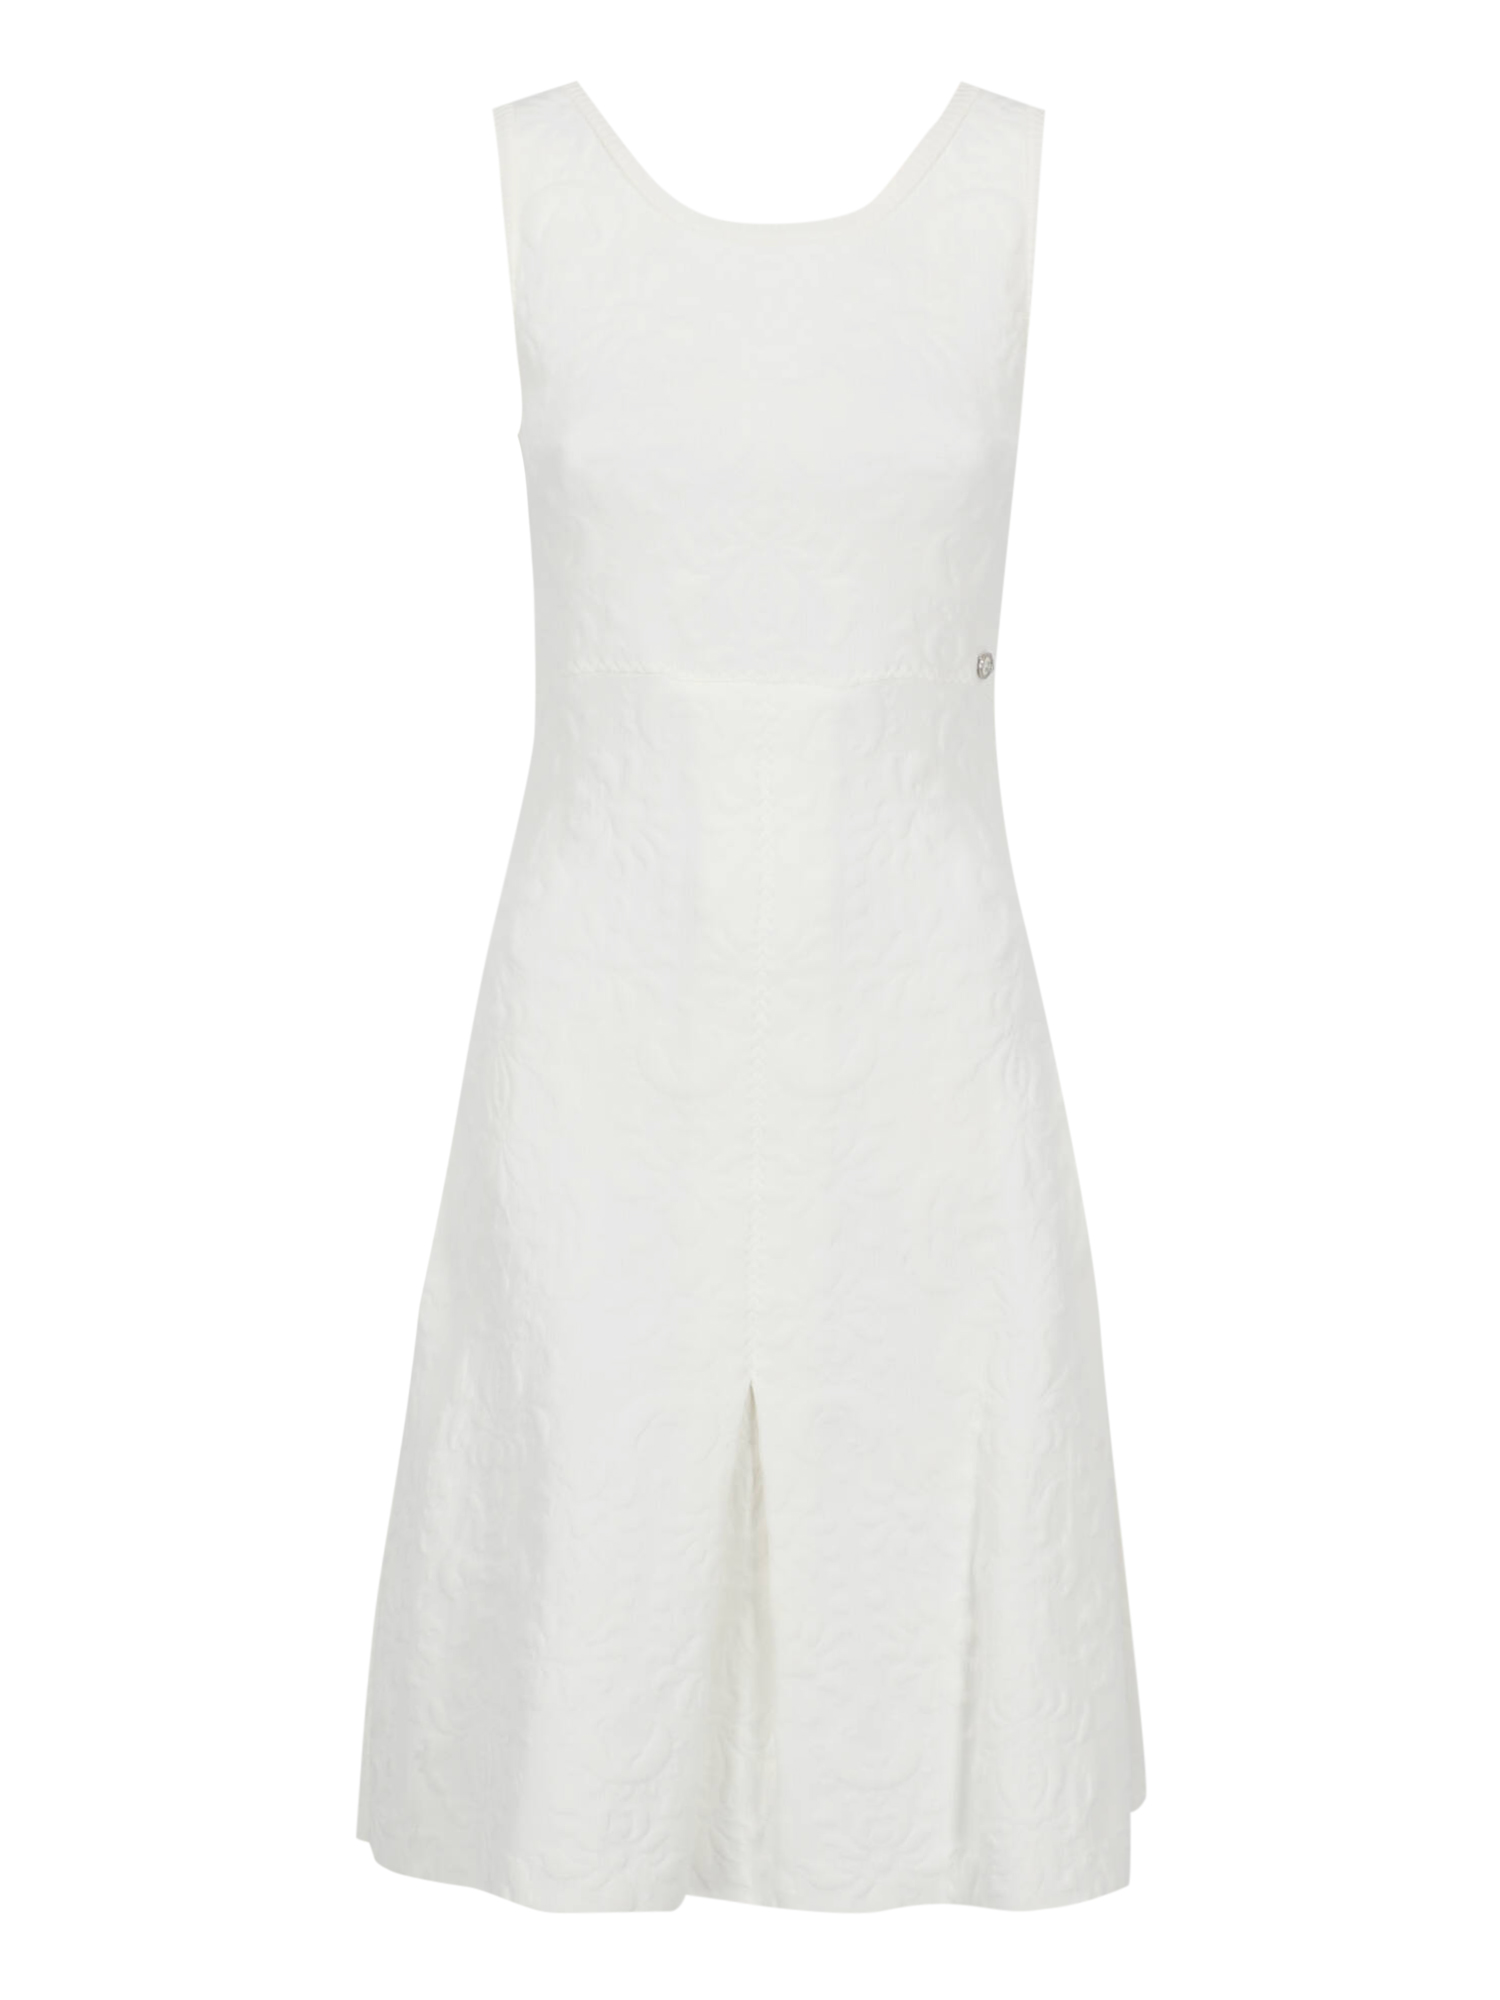 Robes Pour Femme - Chanel - En Synthetic Fibers White - Taille:  -